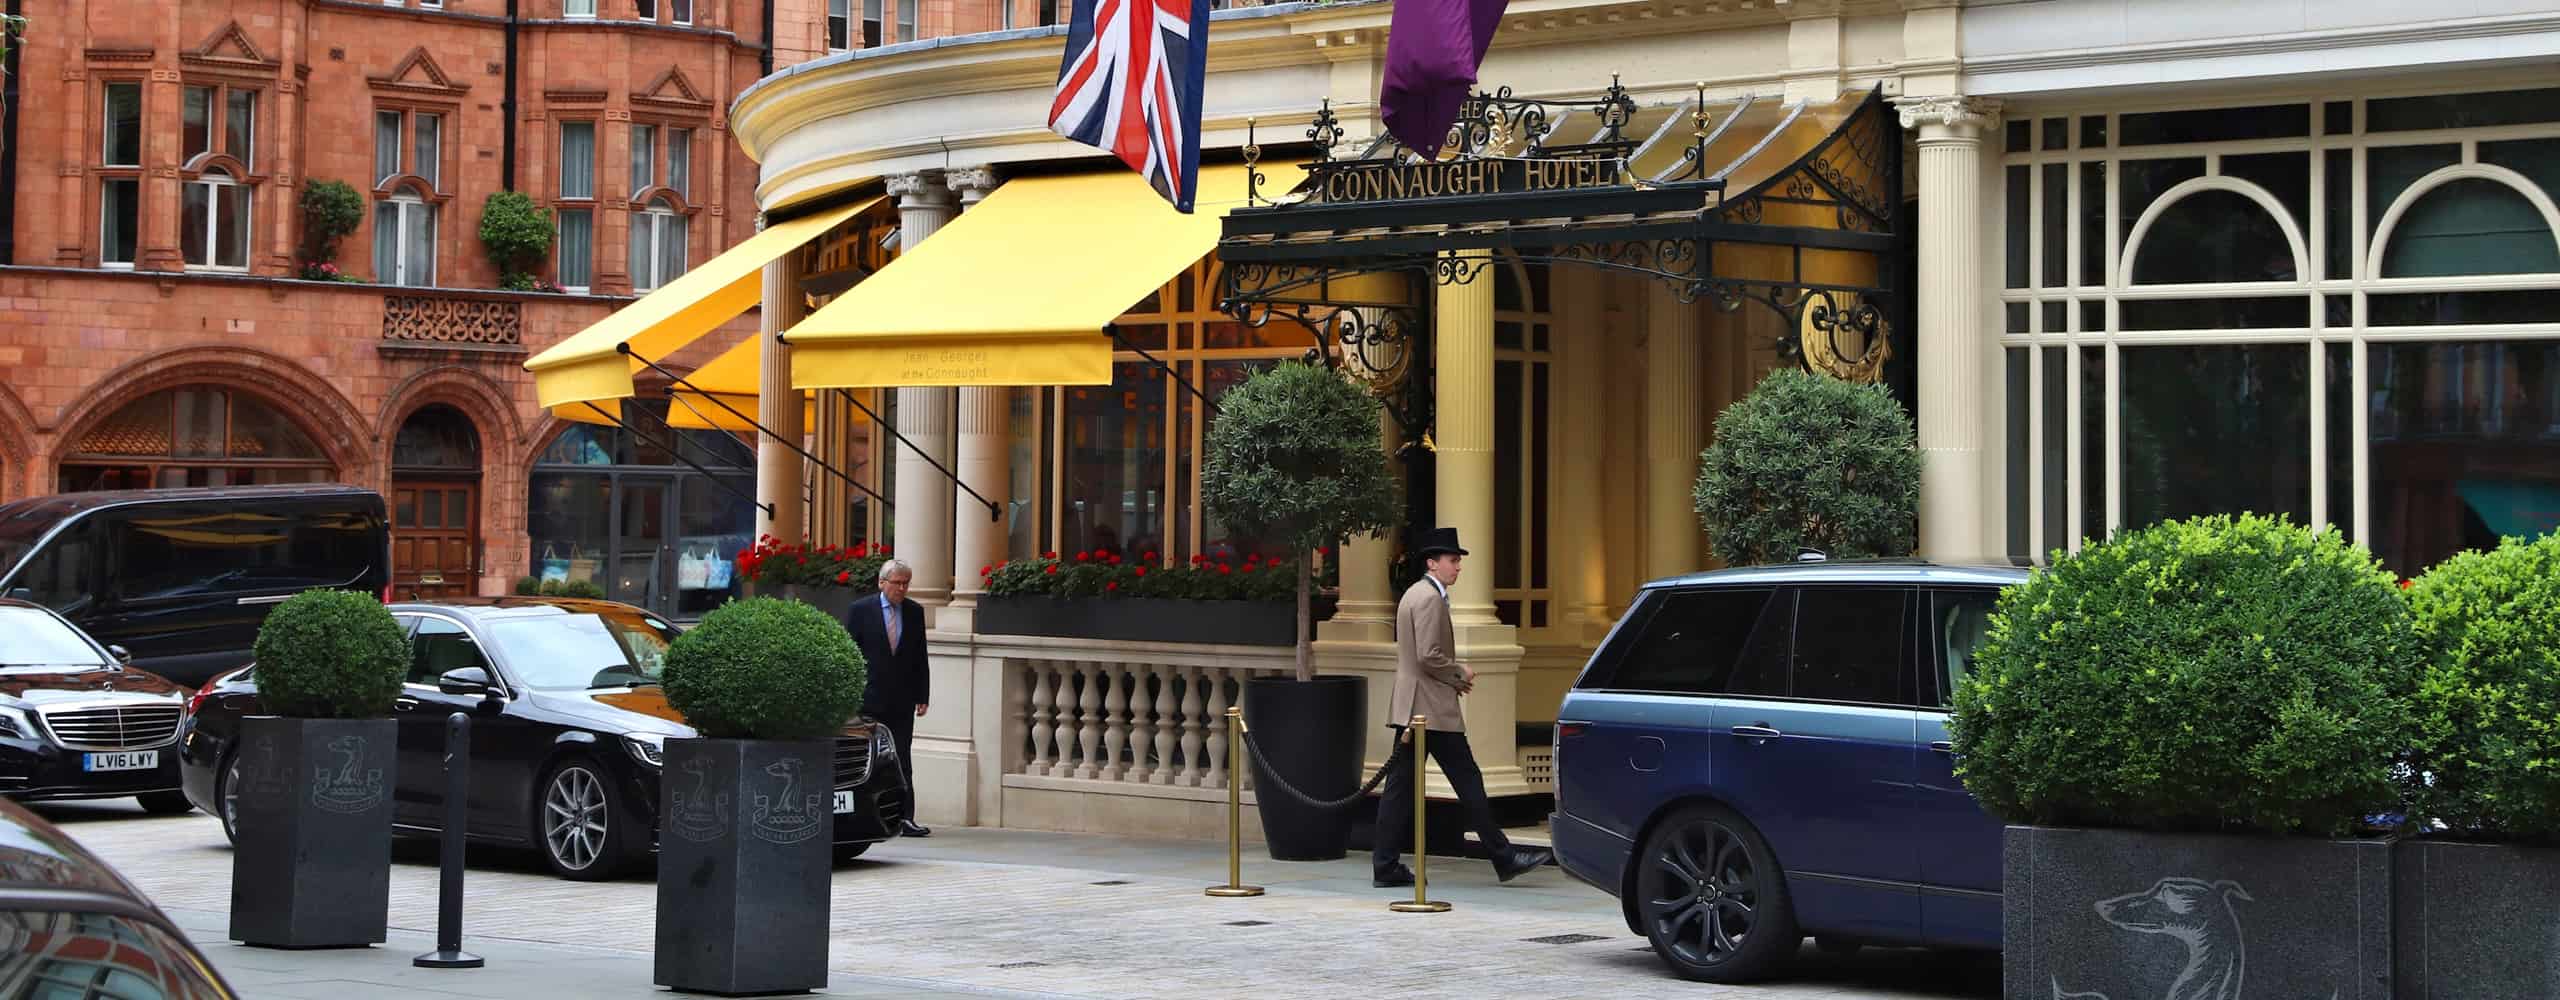 The Connaught Hotel In London, UK